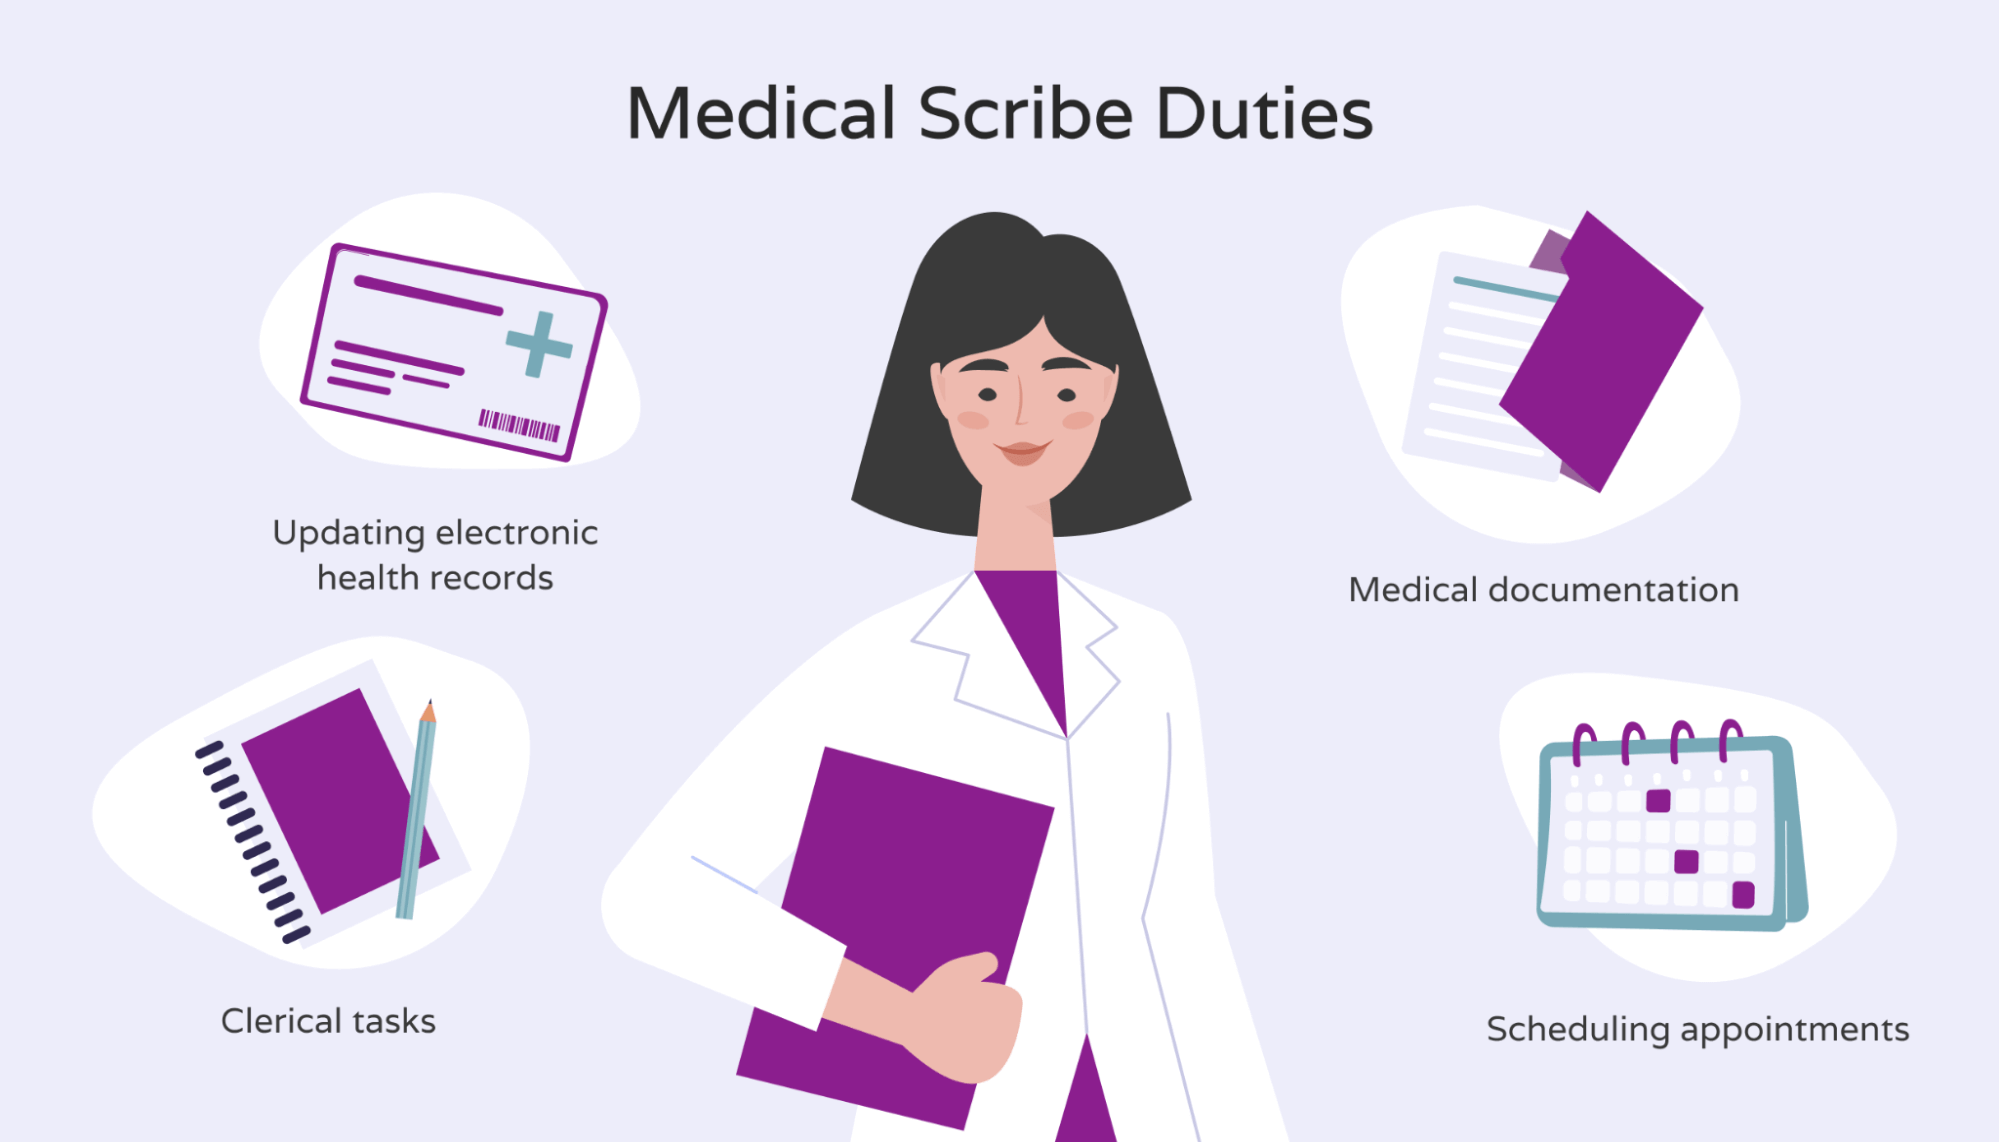 Common duties of a medical scribe